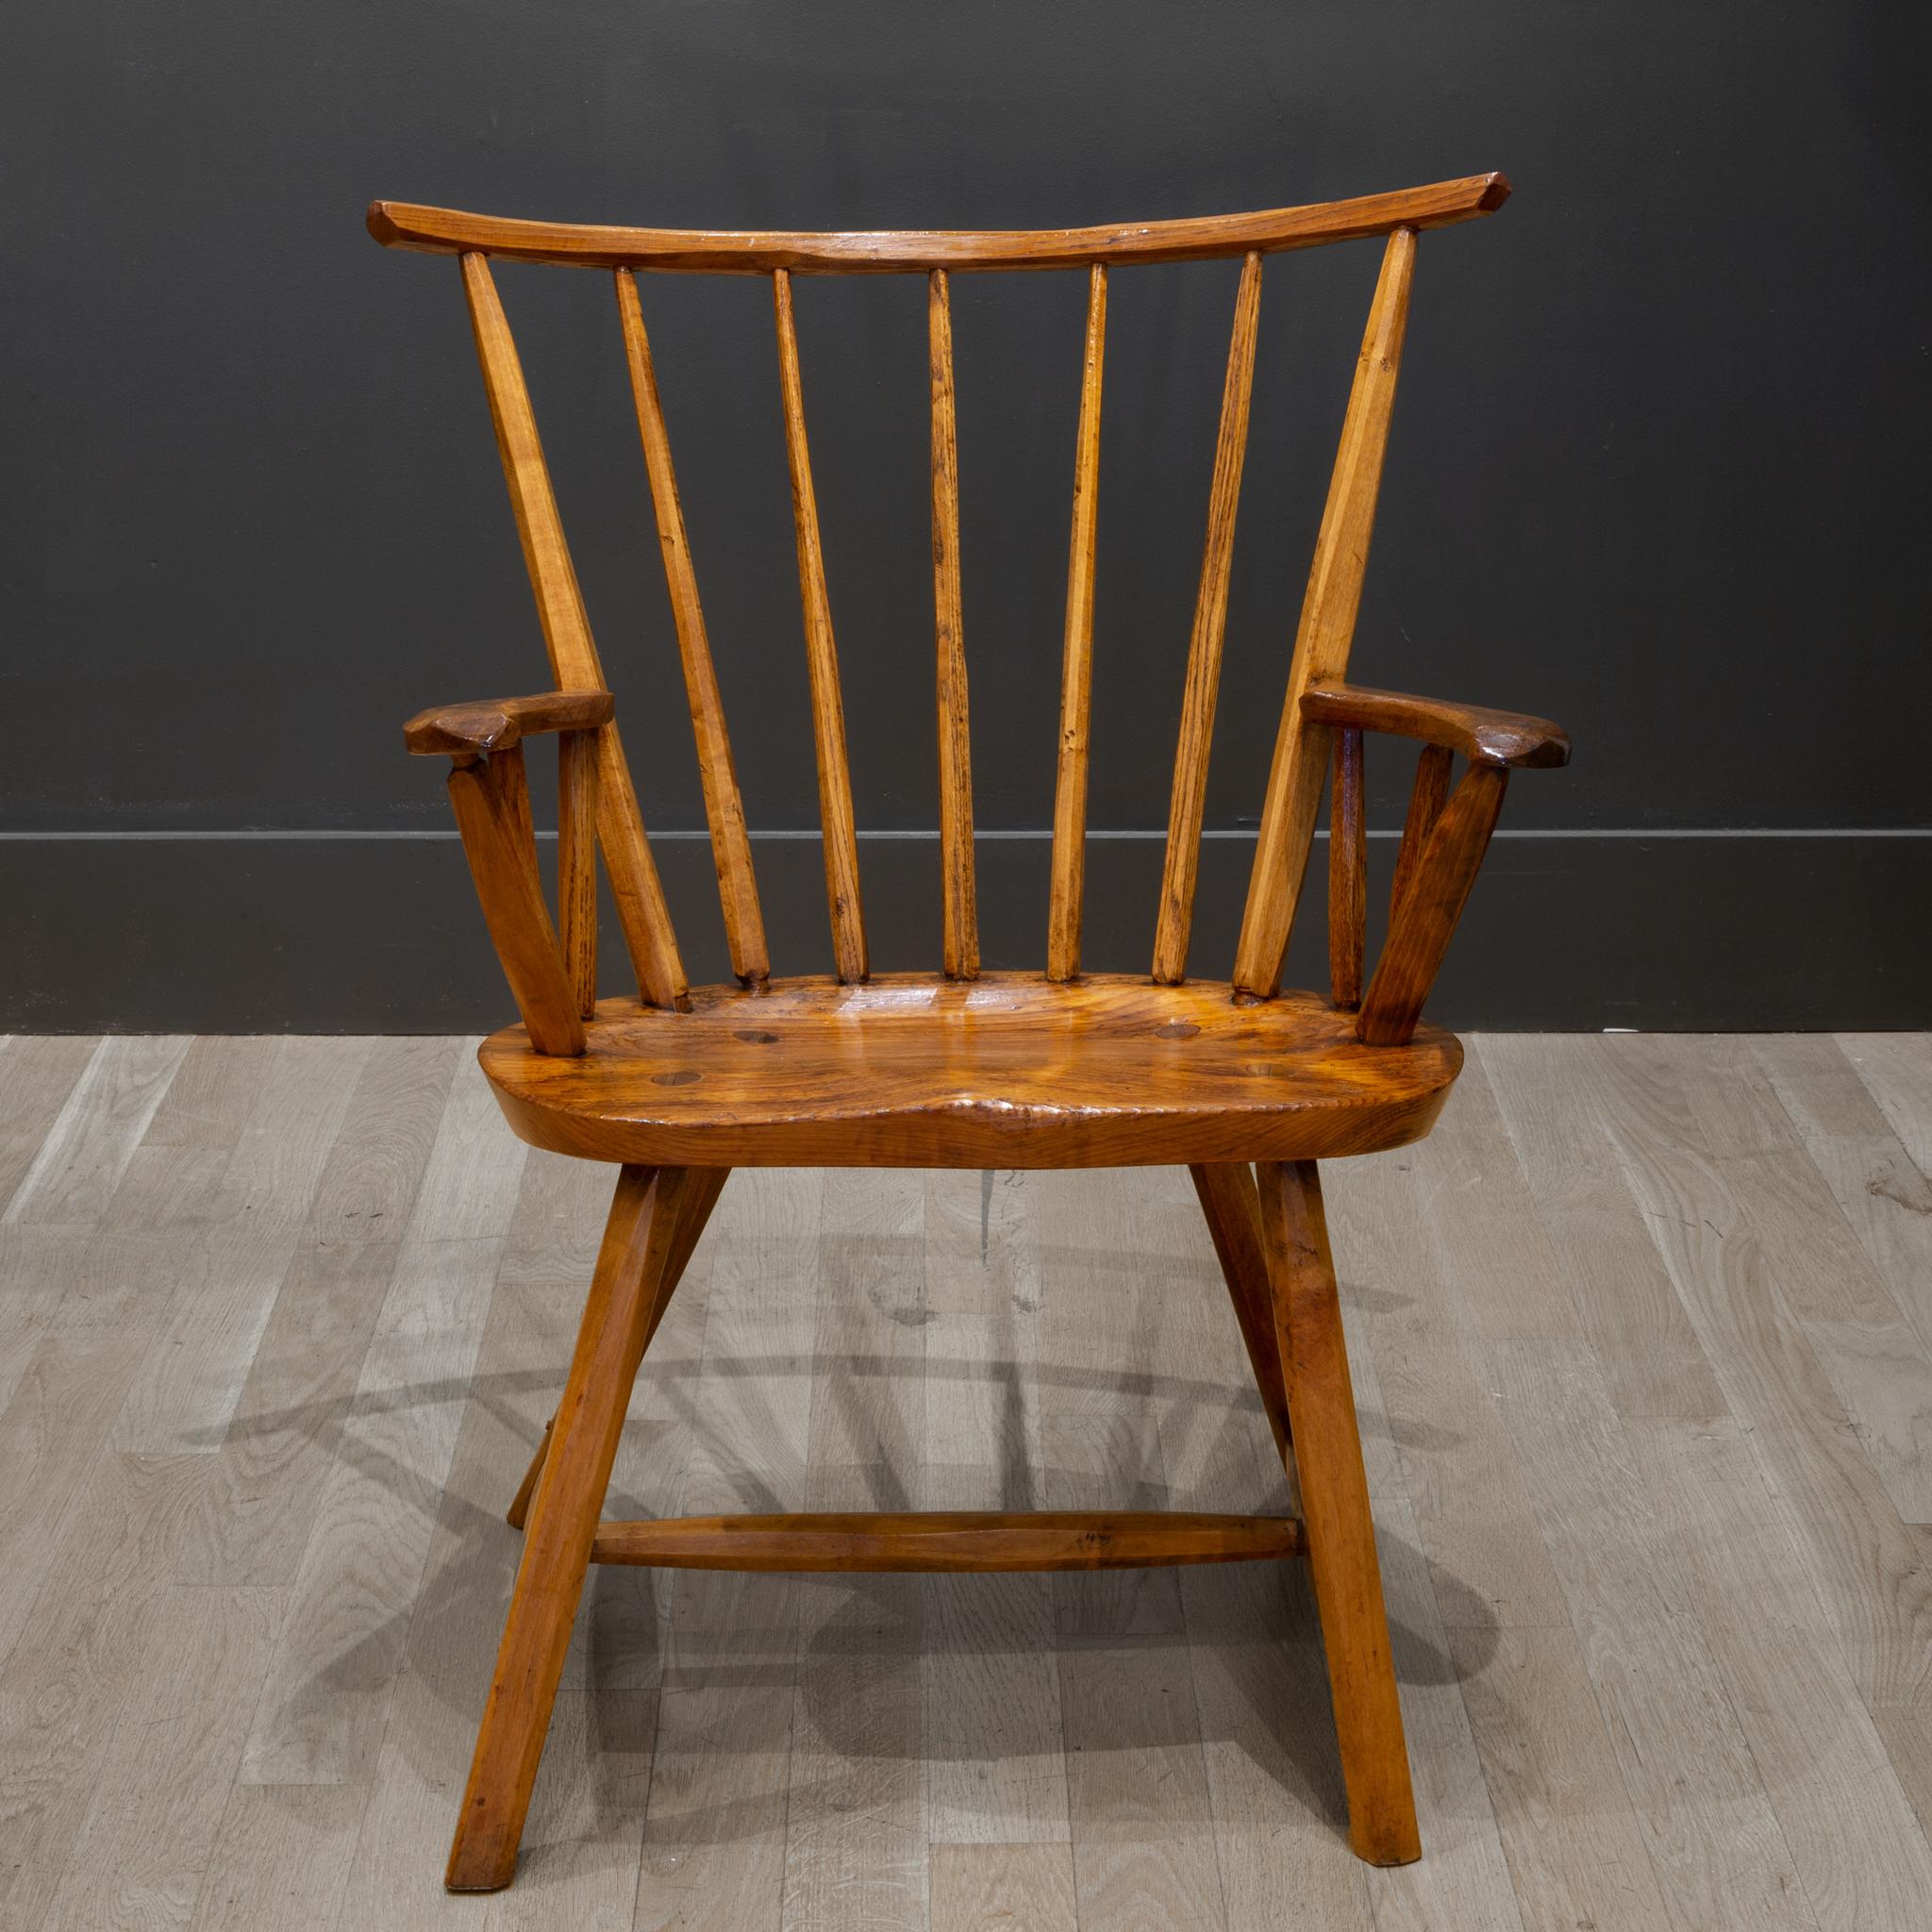 Hickory Handcrafted Primitive Stick Armchairs, circa 1930